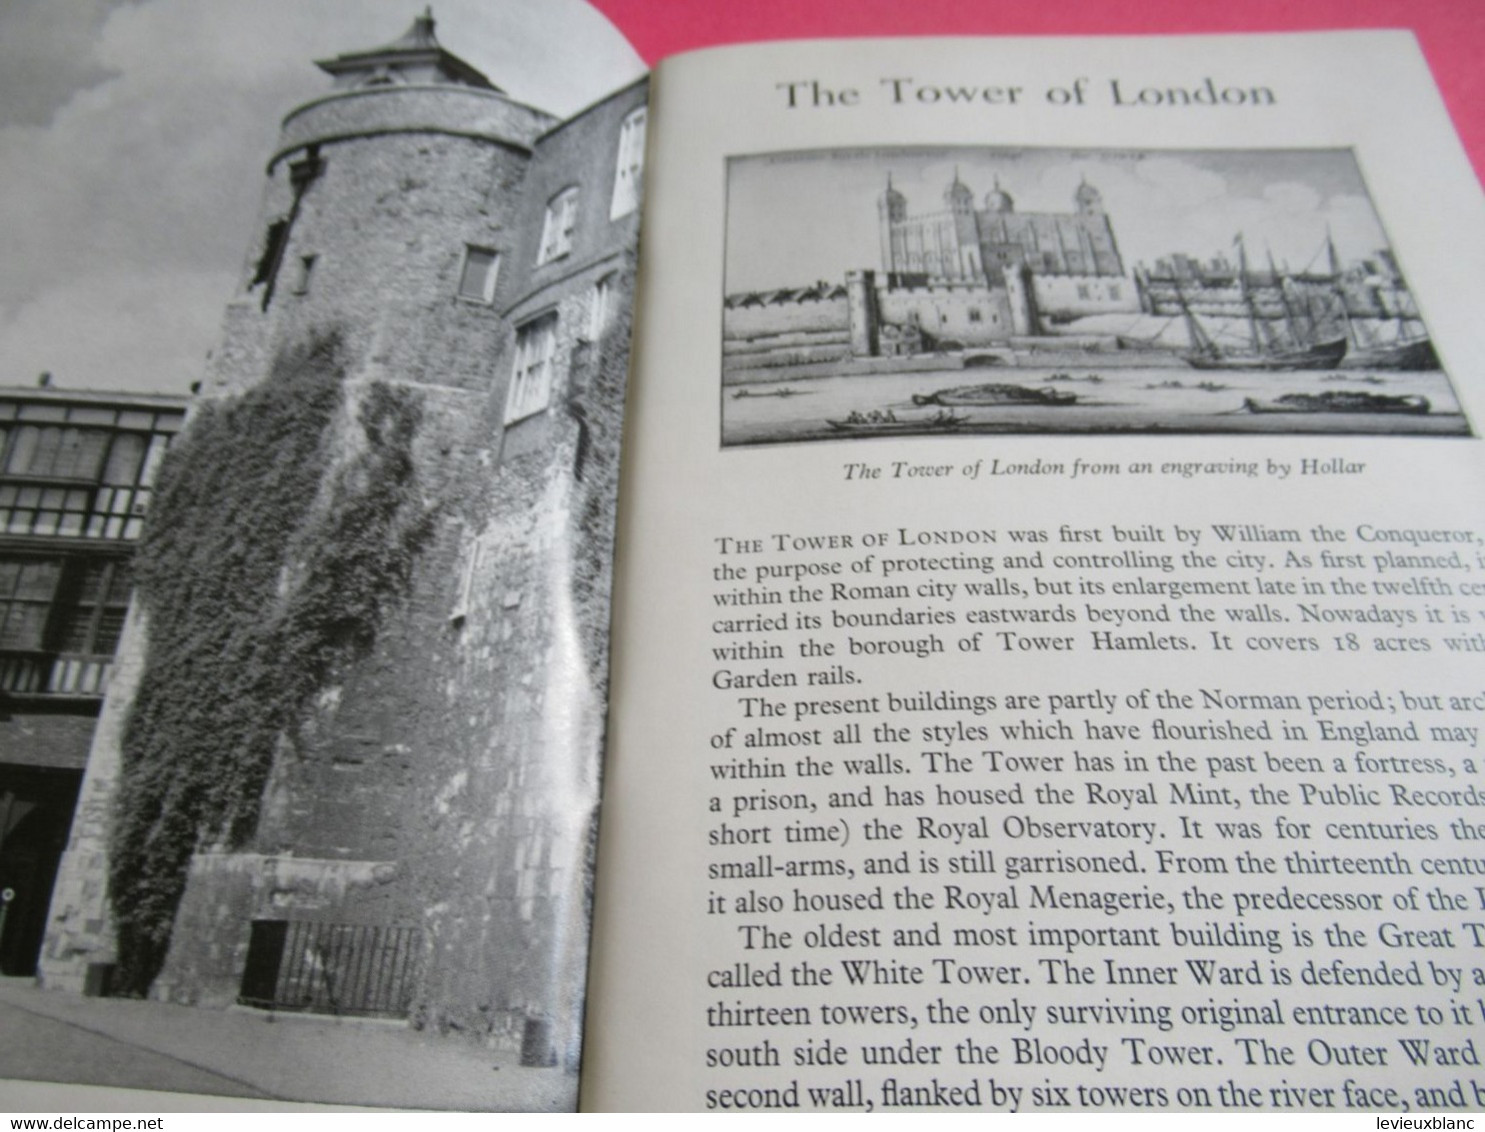 The TOWER OF LONDON/Ministry Of Public Building And Works /Guide Book/1966            PGC431 - Beaux-Arts